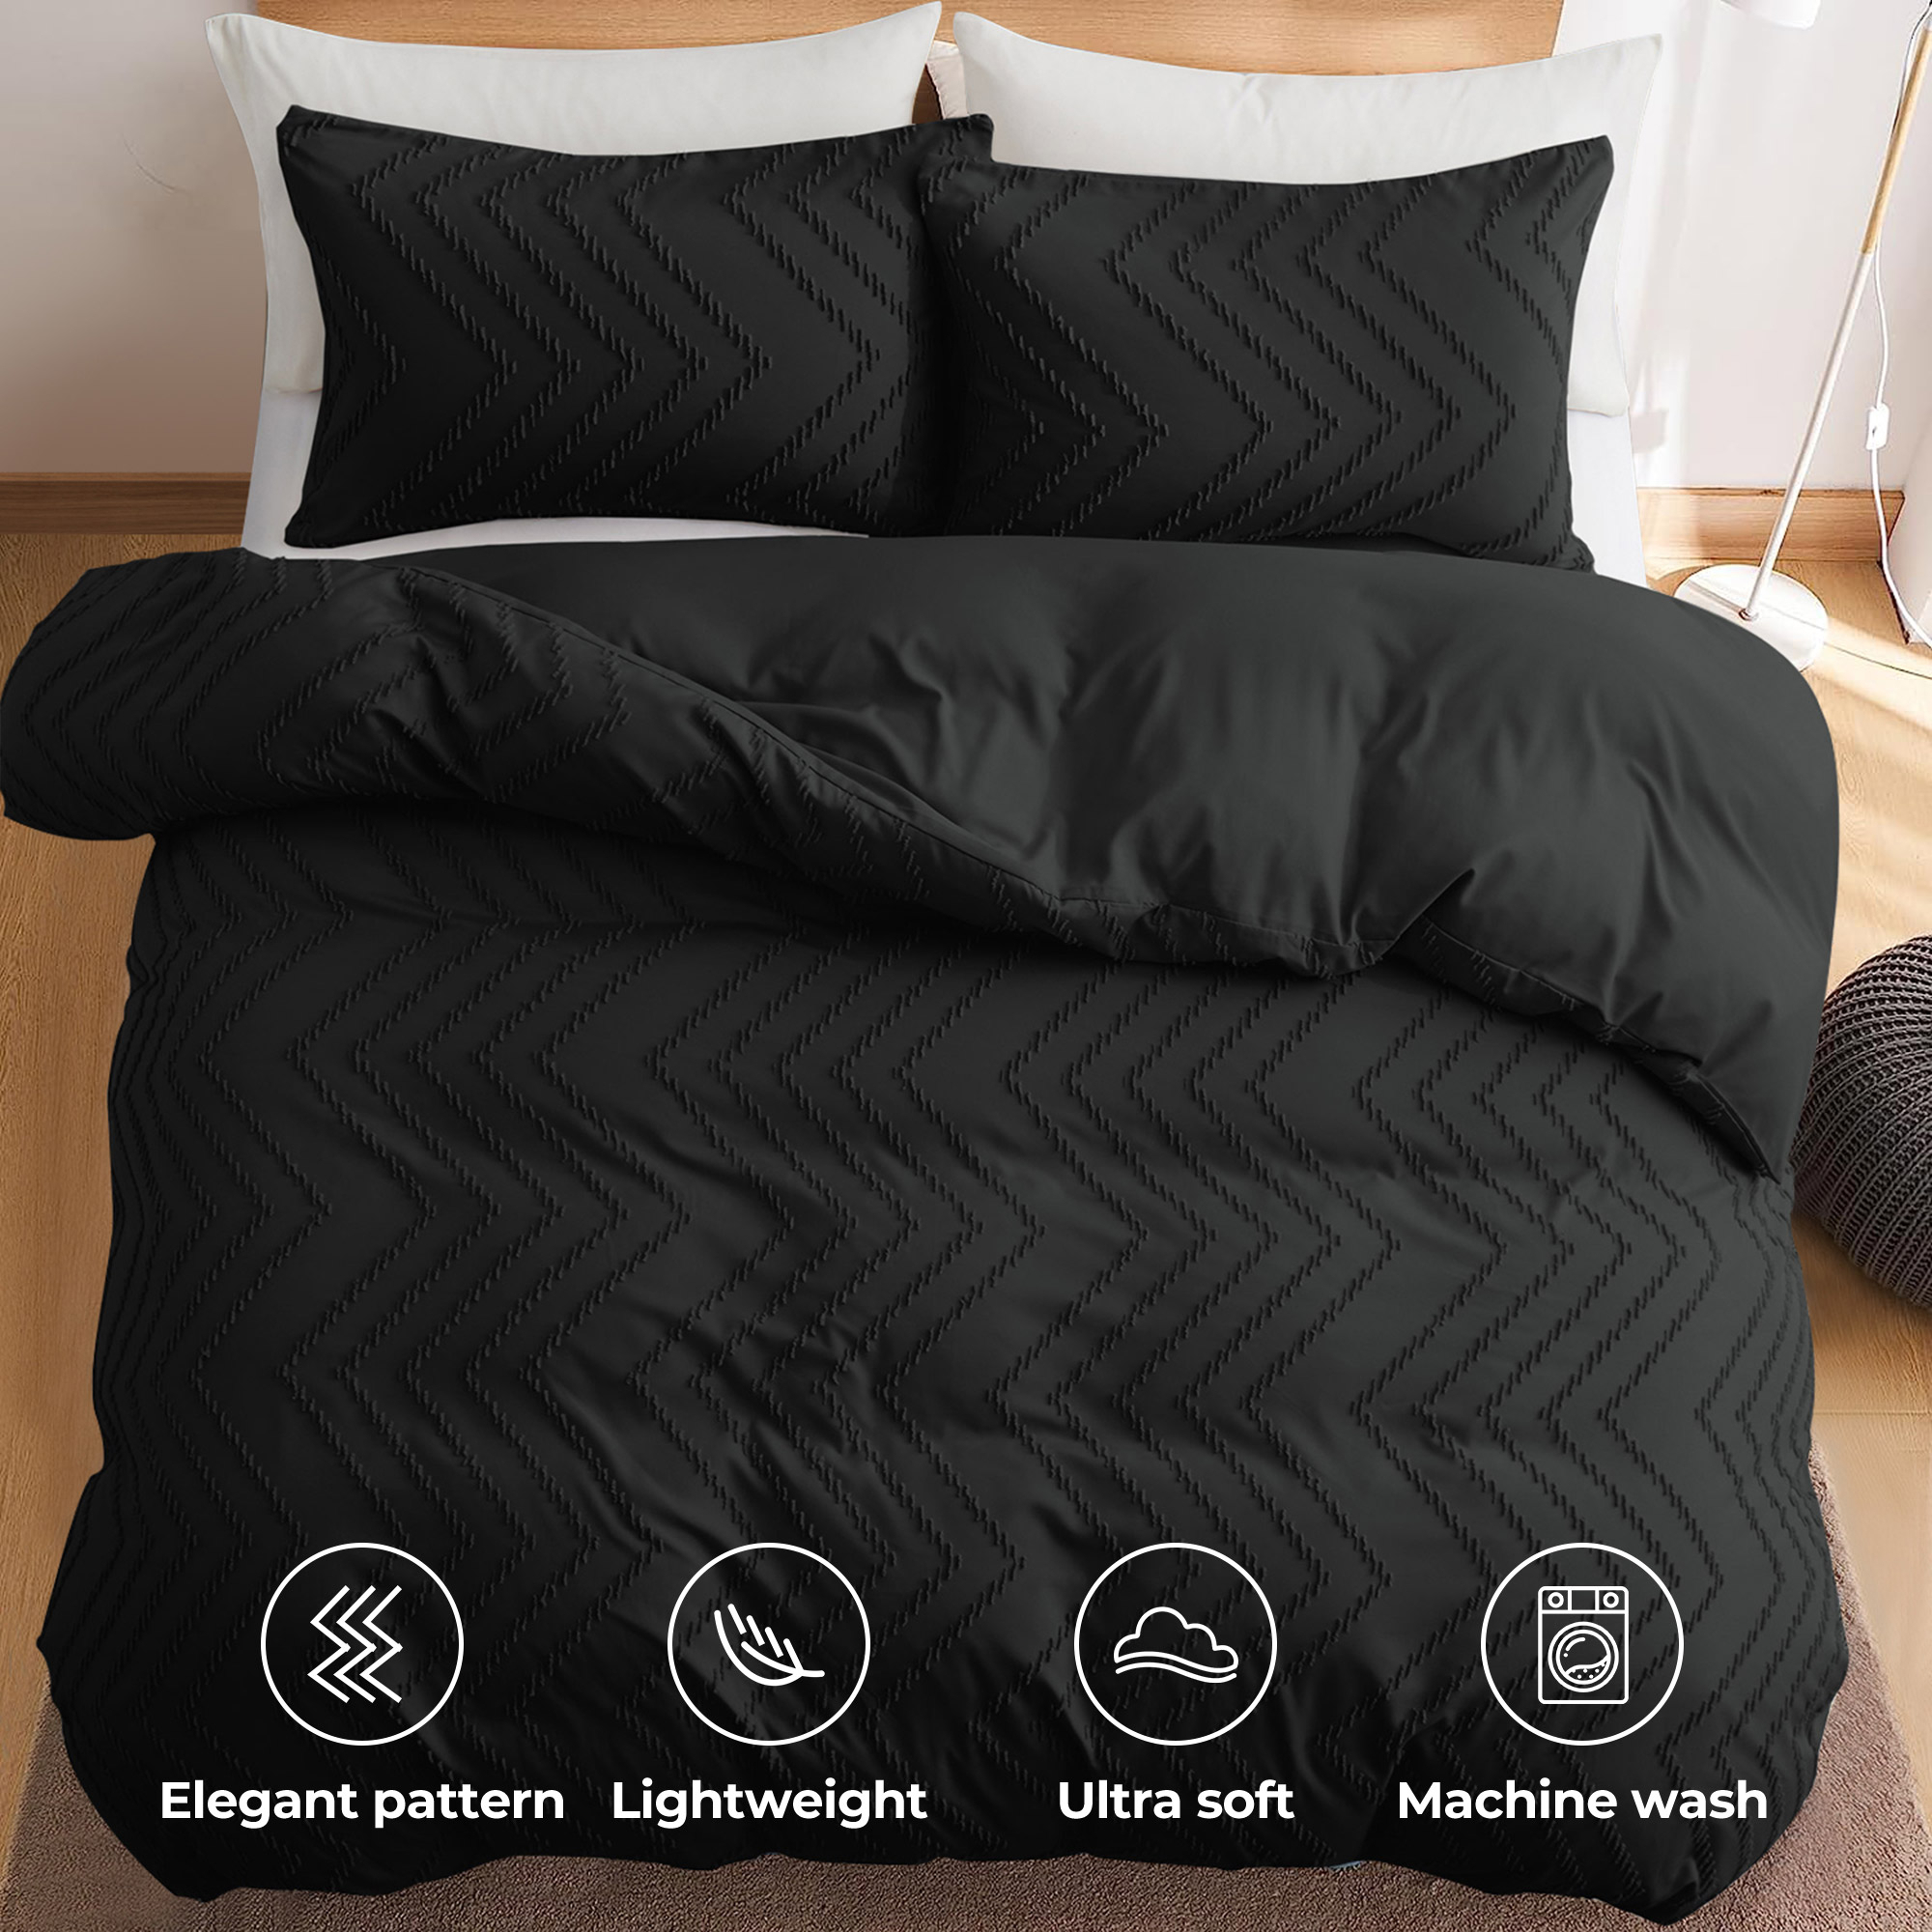 Basic Bedding Sets With All Season Goose Down Feather Comforter, 2 Pack Goose Down Pillows, Duvet Cover Set - Black Bundles Option, Full/Que